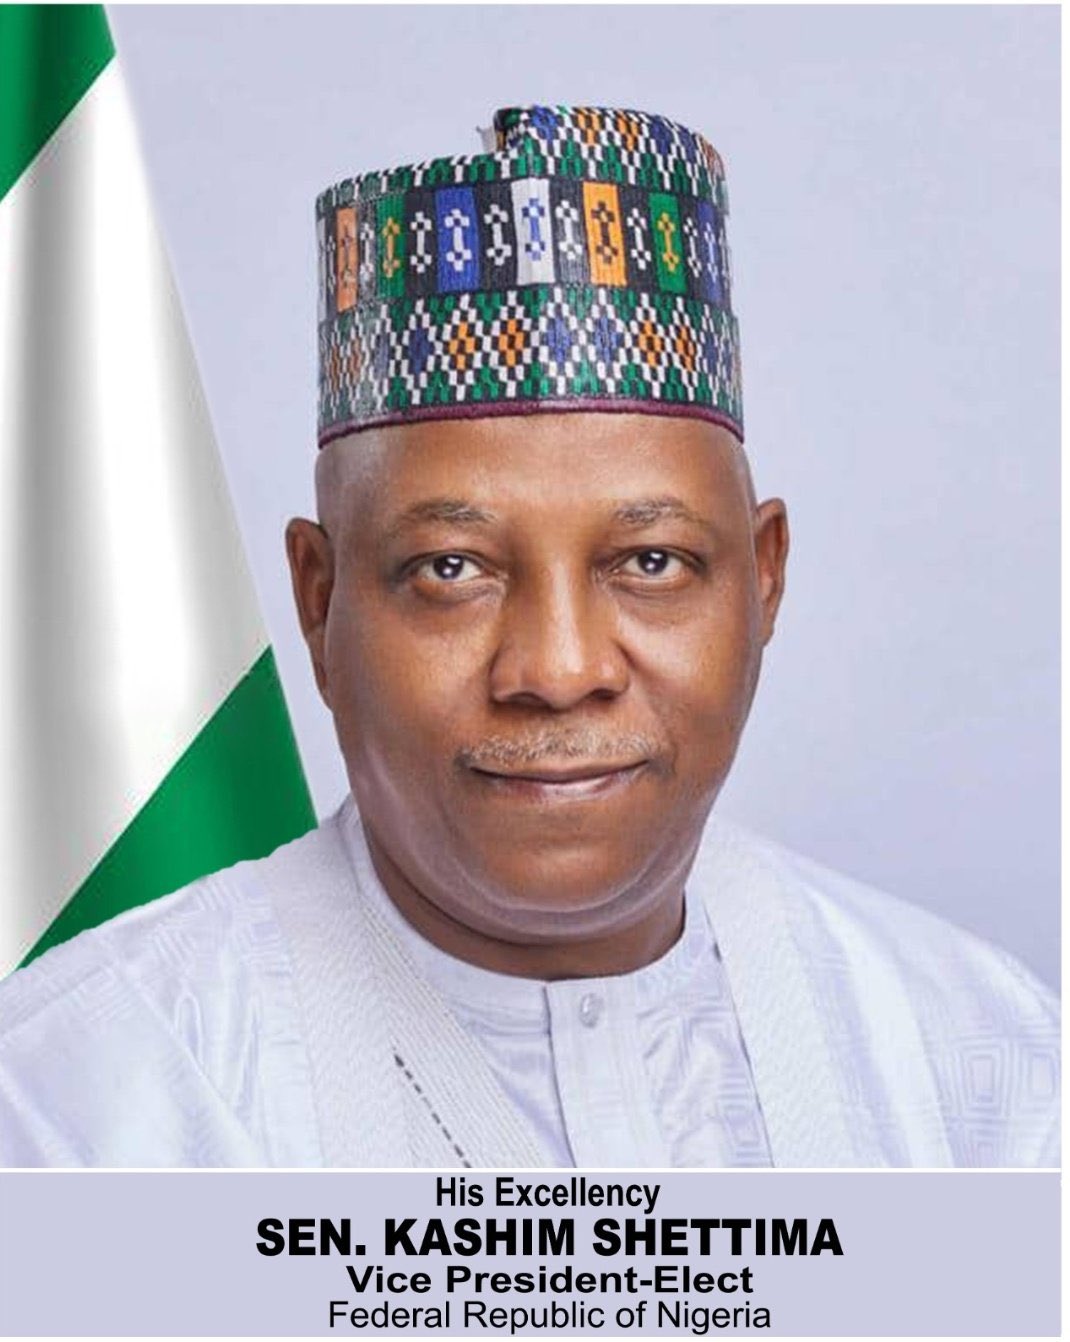 MAY 29 TRANSITION: Official portraits of Tinubu and Shettima released